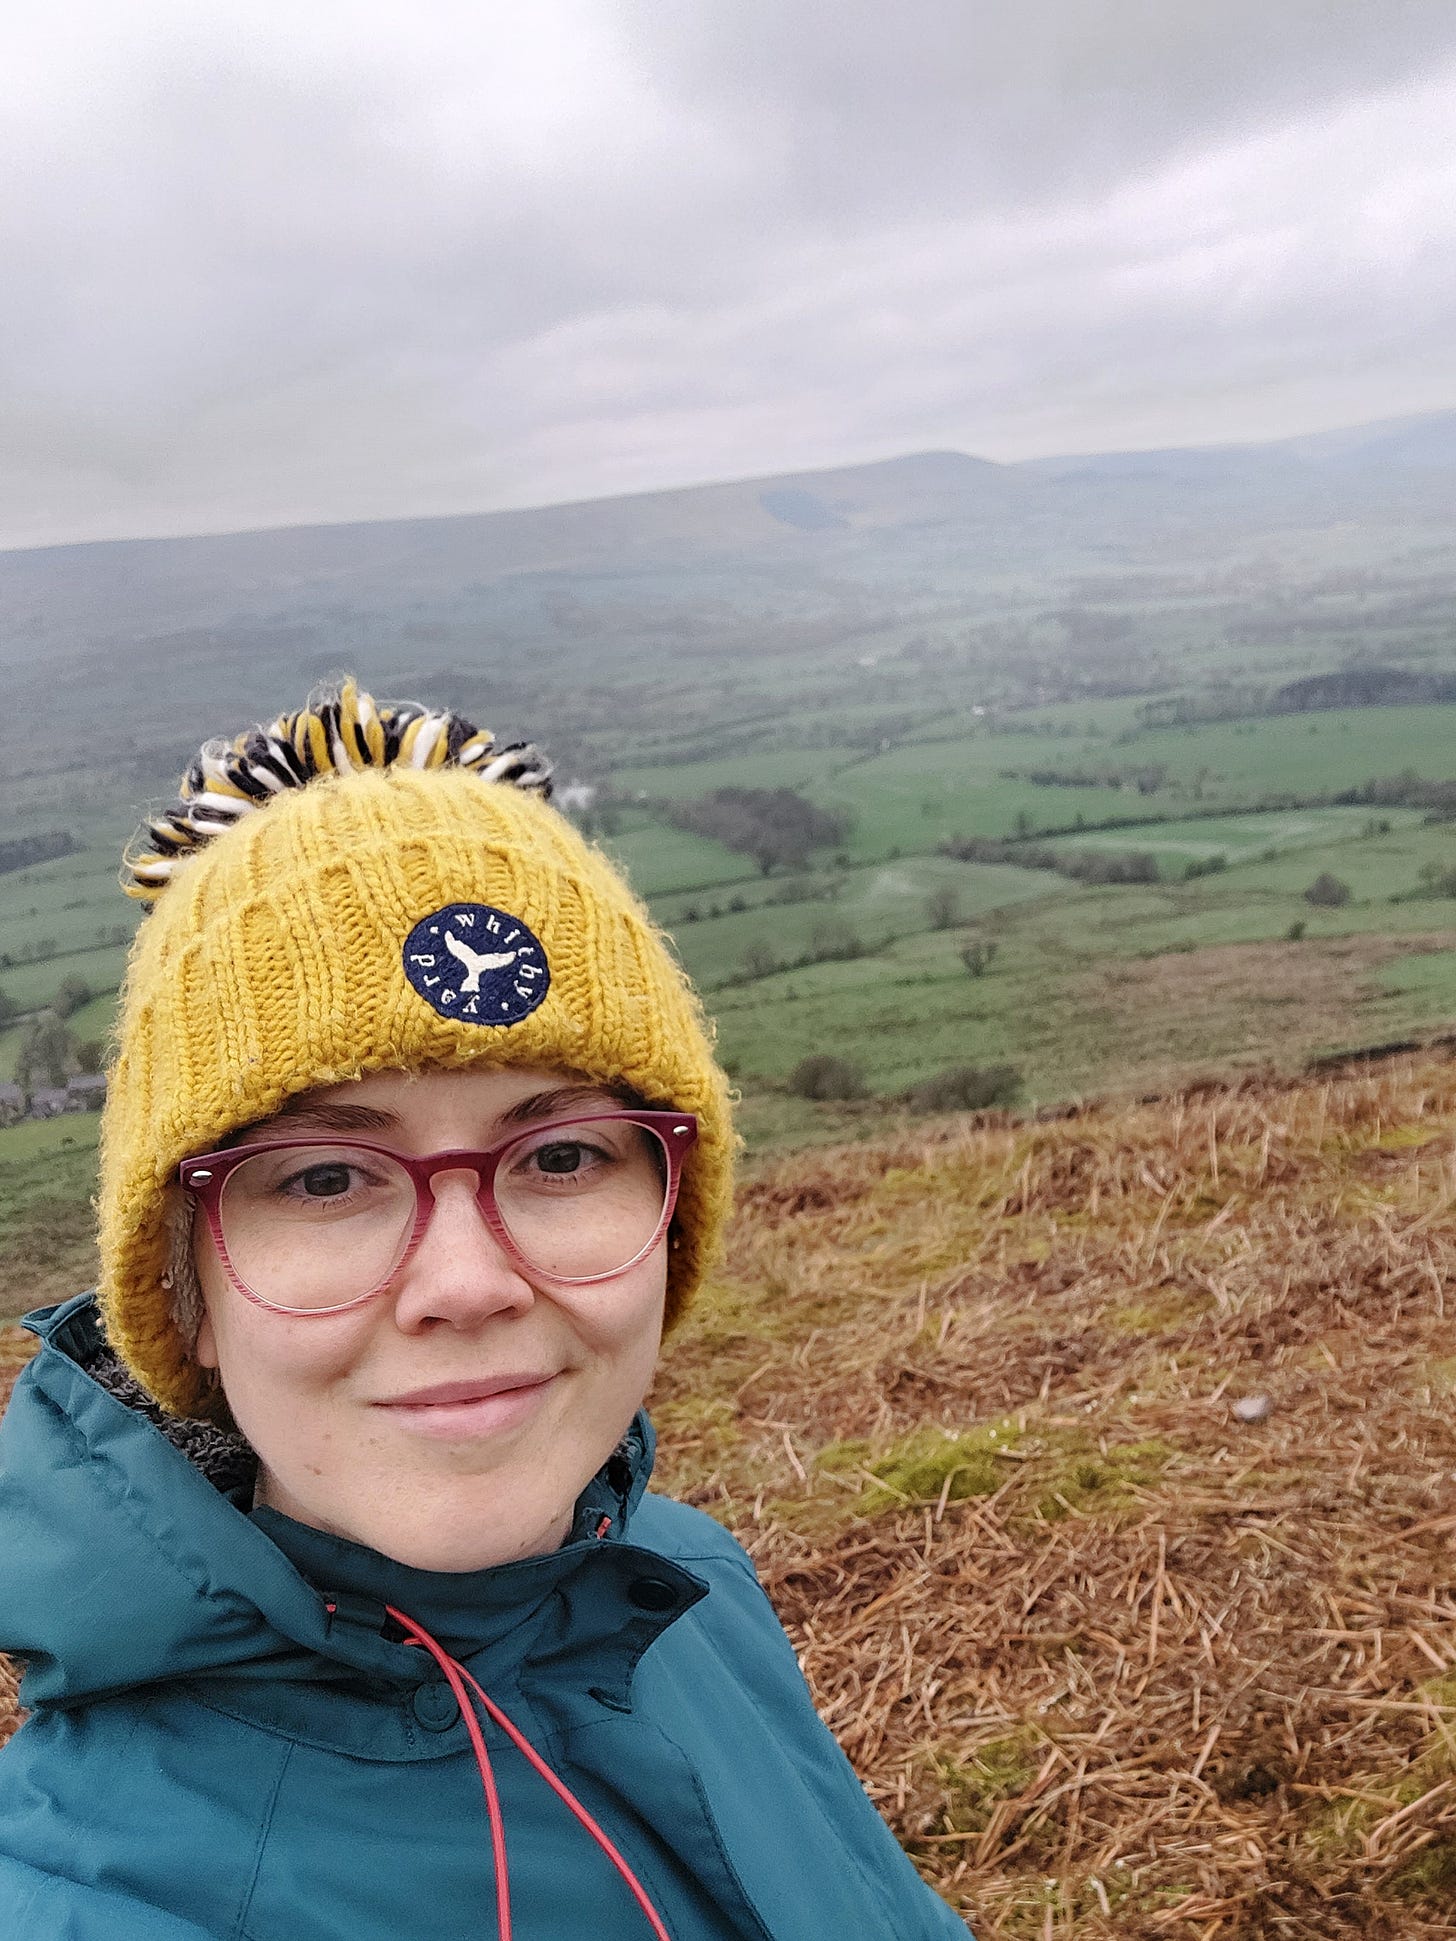 A selfie of Janelle, smiling at the camera wearing a yellow hat and pink glasses. She is white with brown eyes. Behind her is a misty view of fields and a distant fell